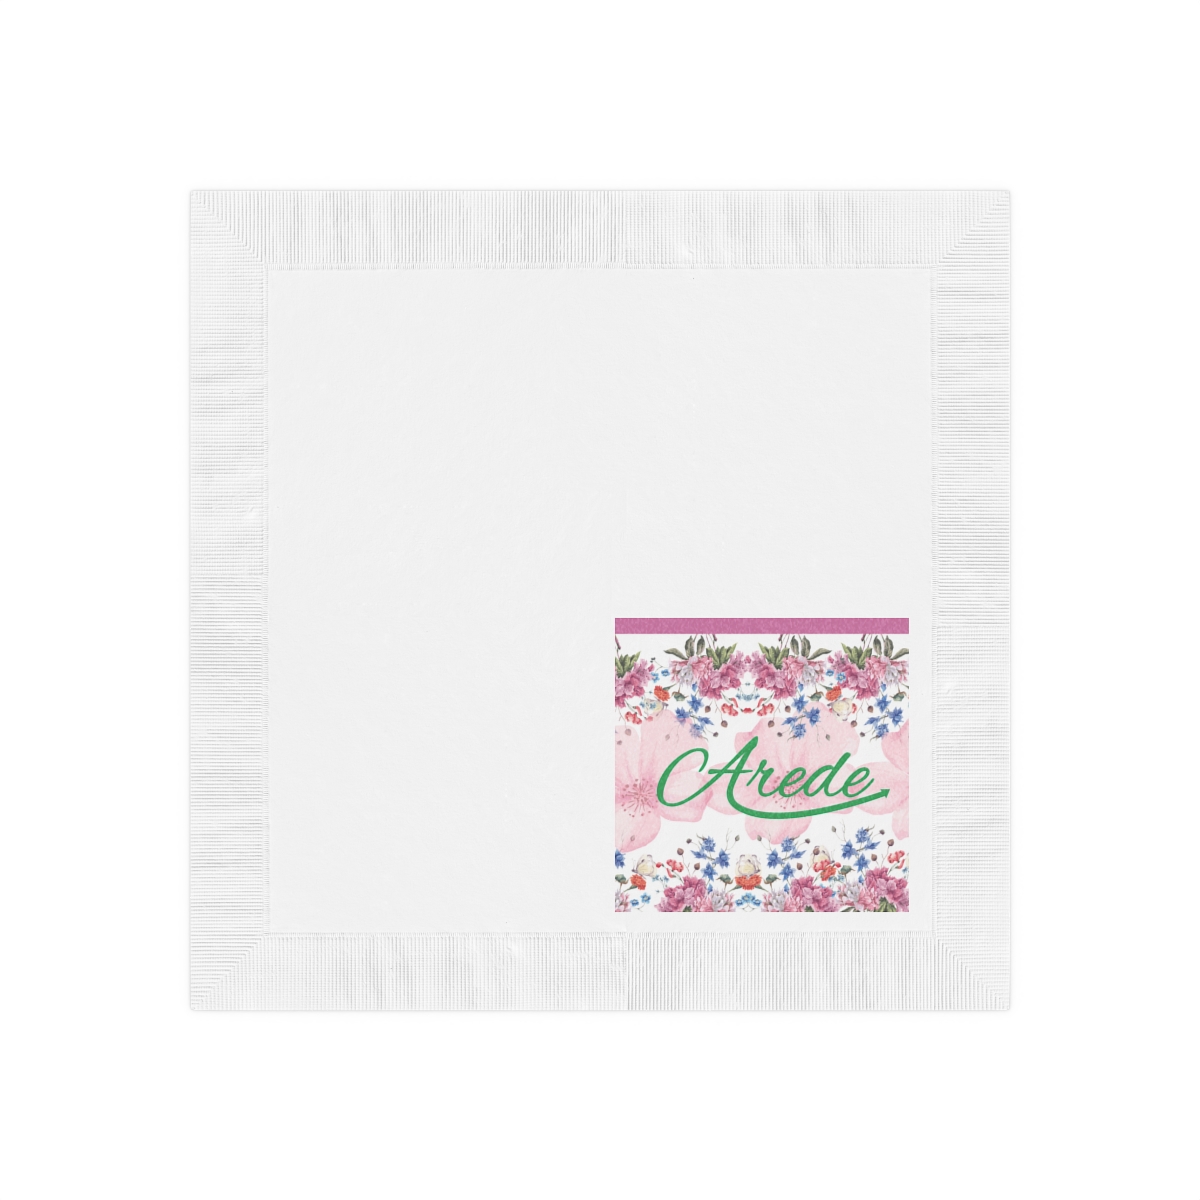 White Coined Napkins product thumbnail image